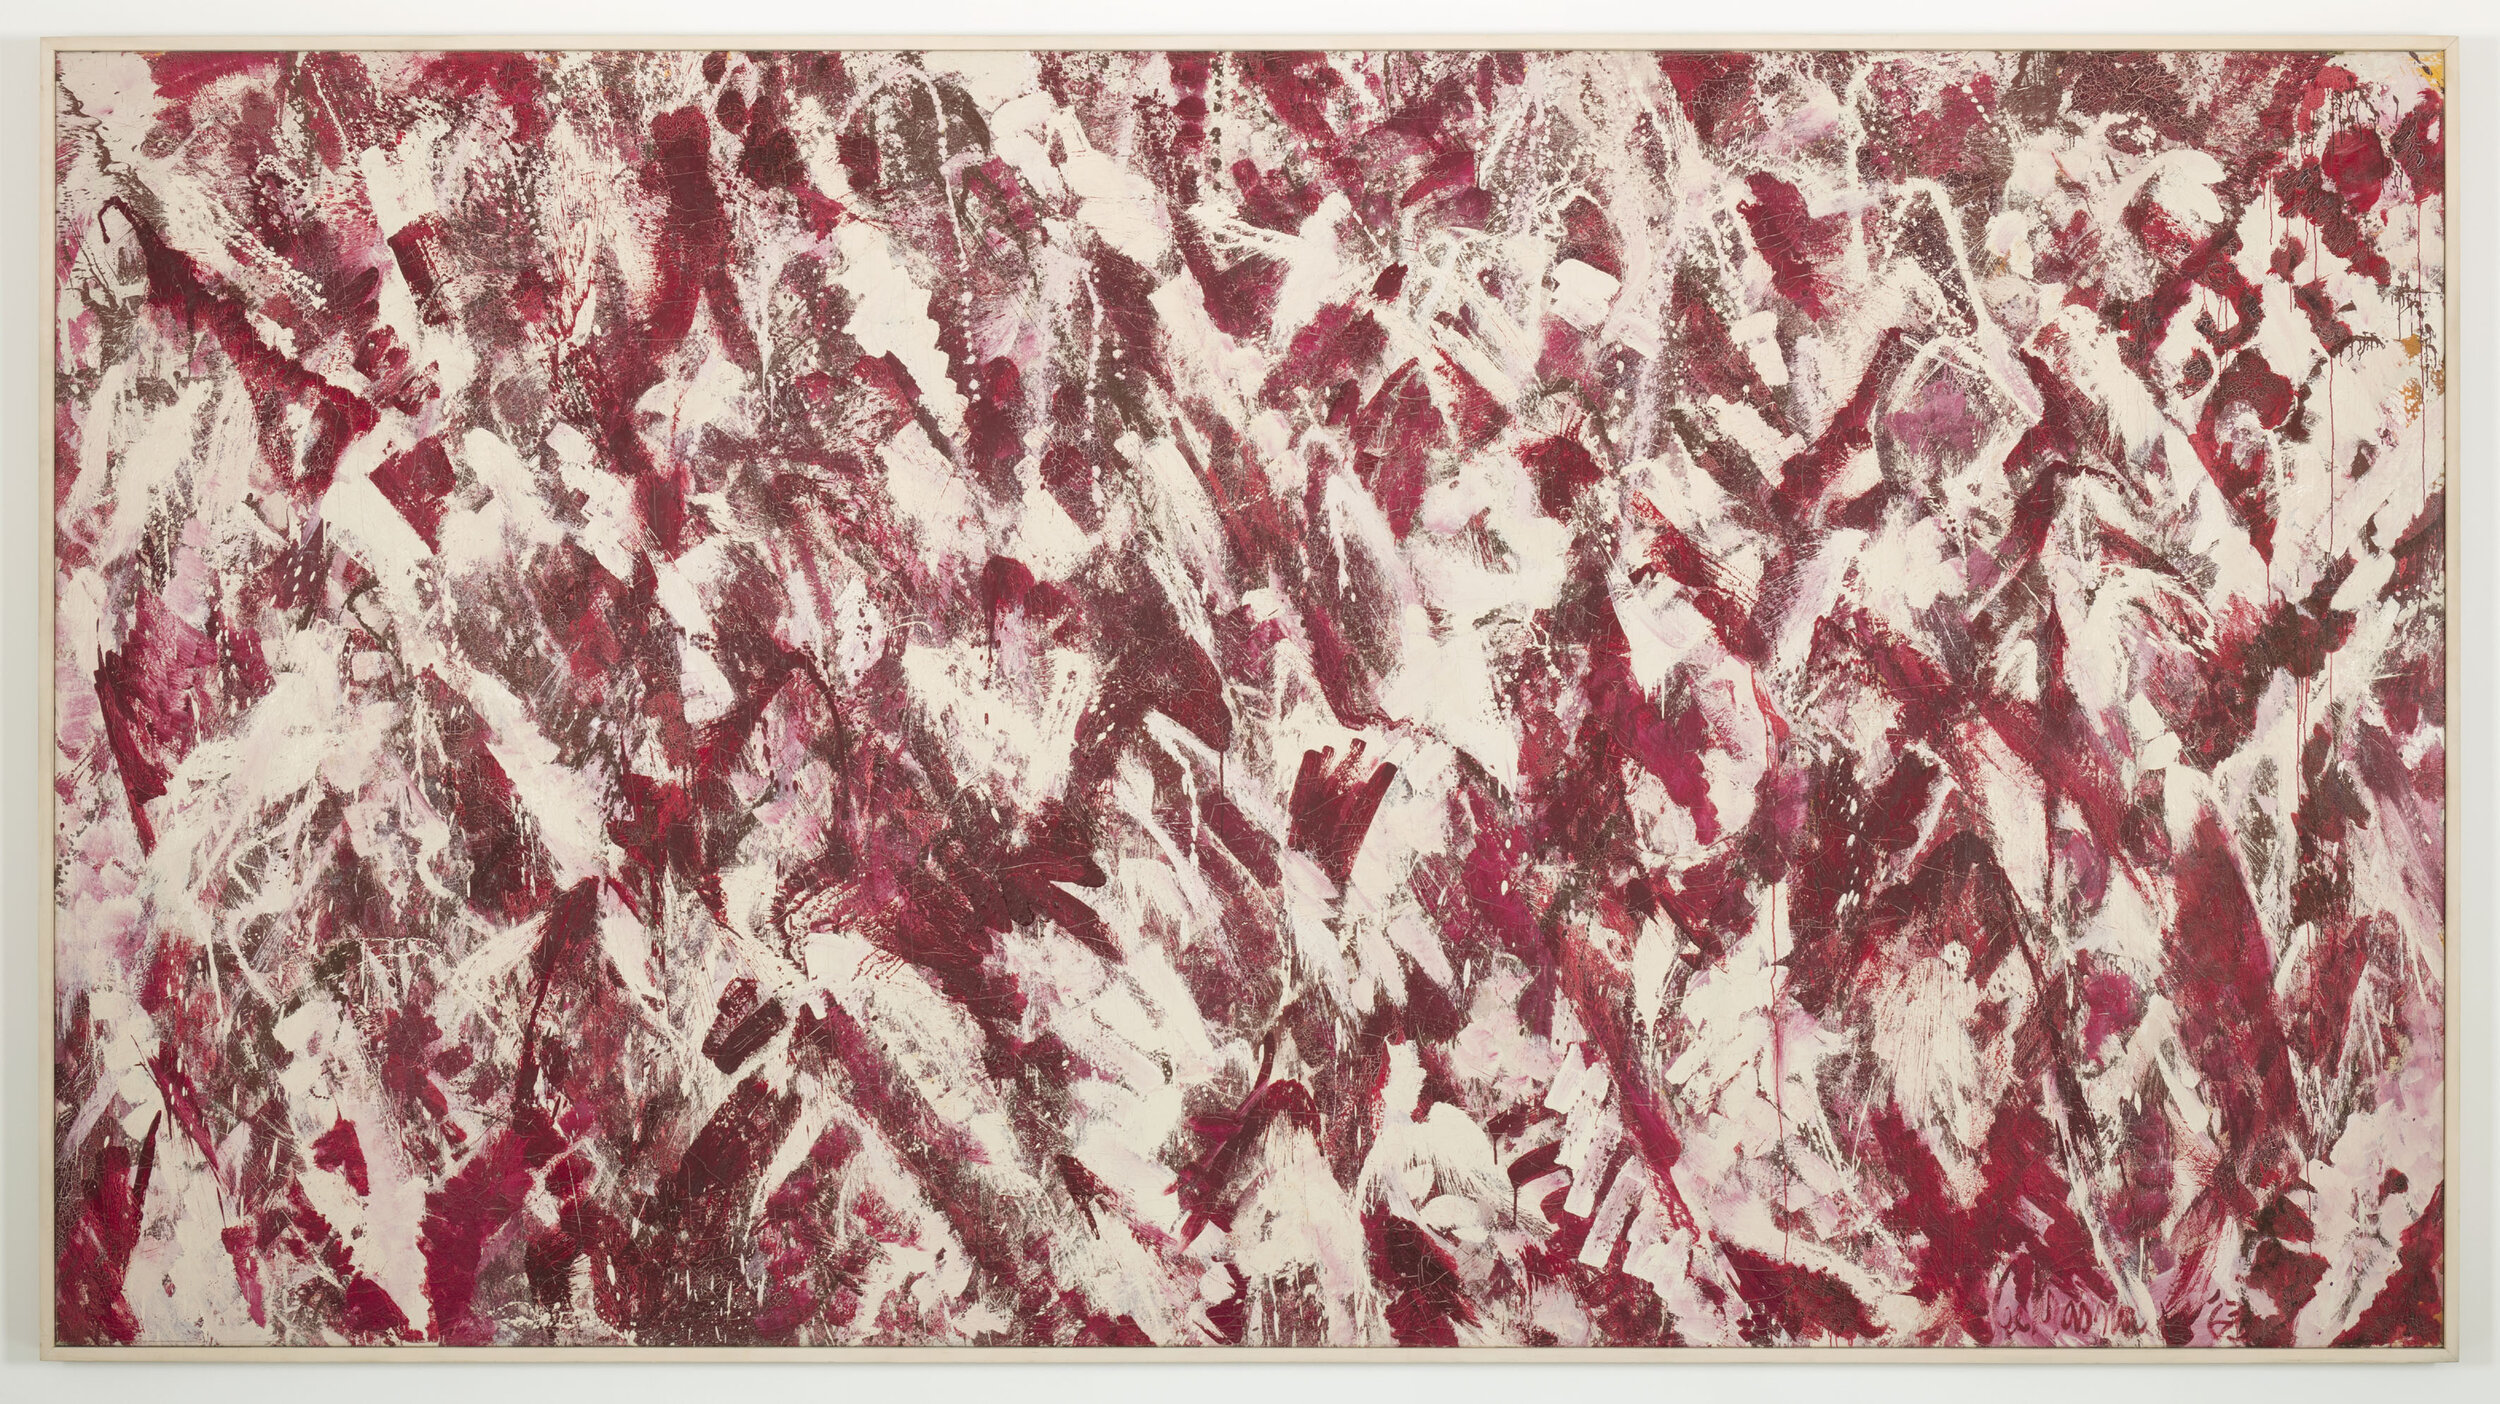  LEE KRASNER (1908–1984)    Another Storm , 1963. Oil on canvas. 94 x 176 ¼ inches. 